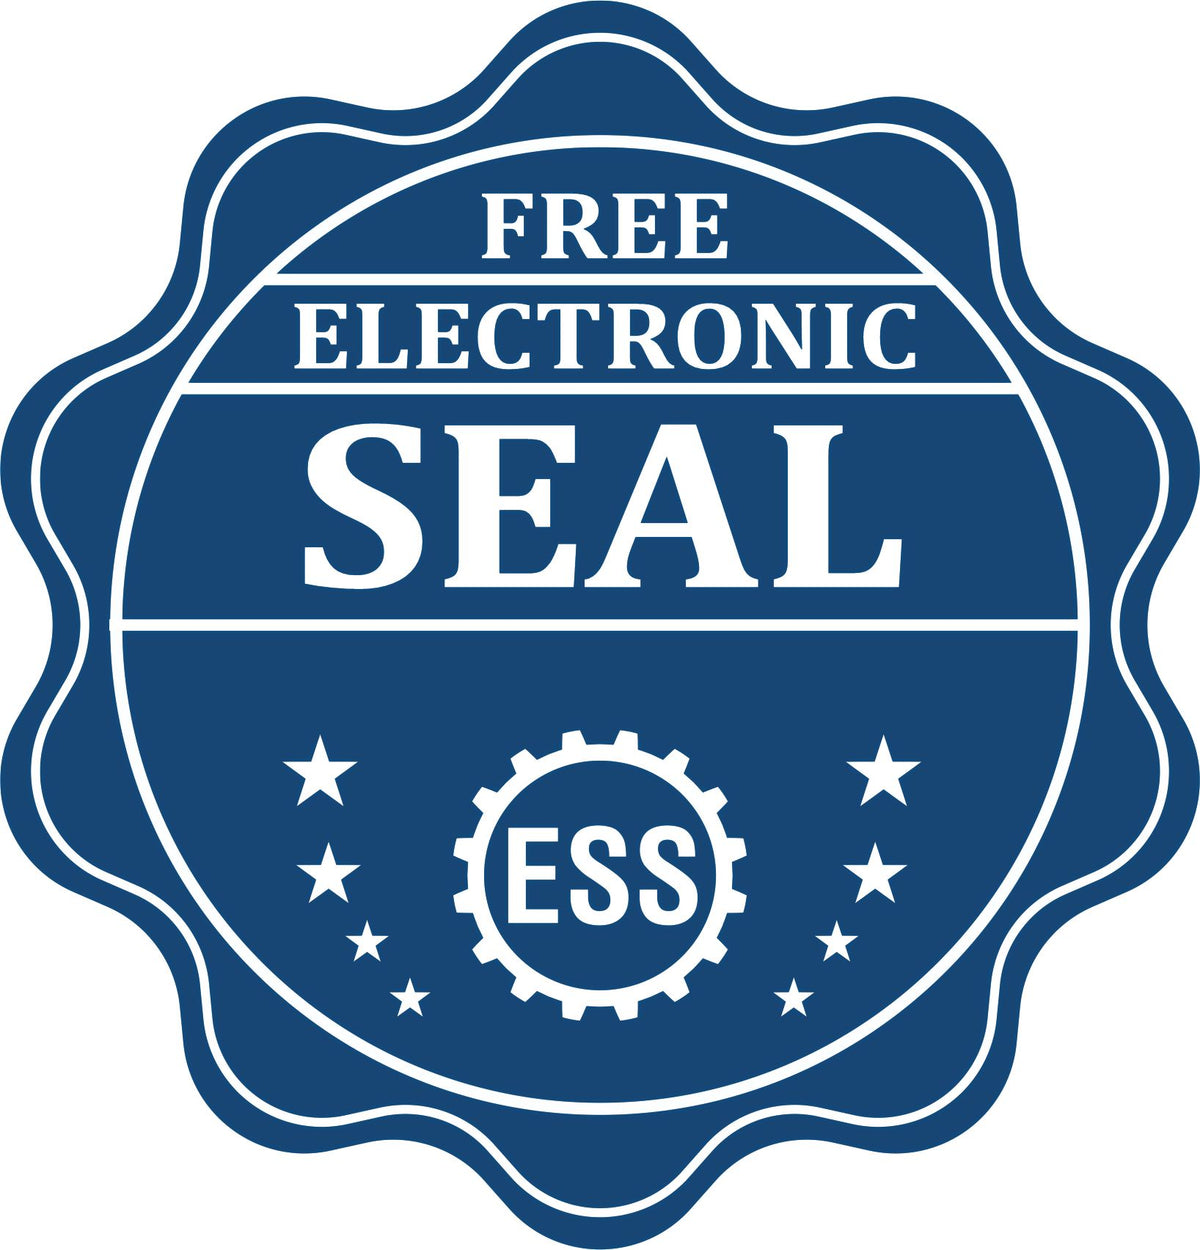 A badge showing a free electronic seal for the Heavy-Duty Guam Rectangular Notary Stamp with stars and the ESS gear on the emblem.